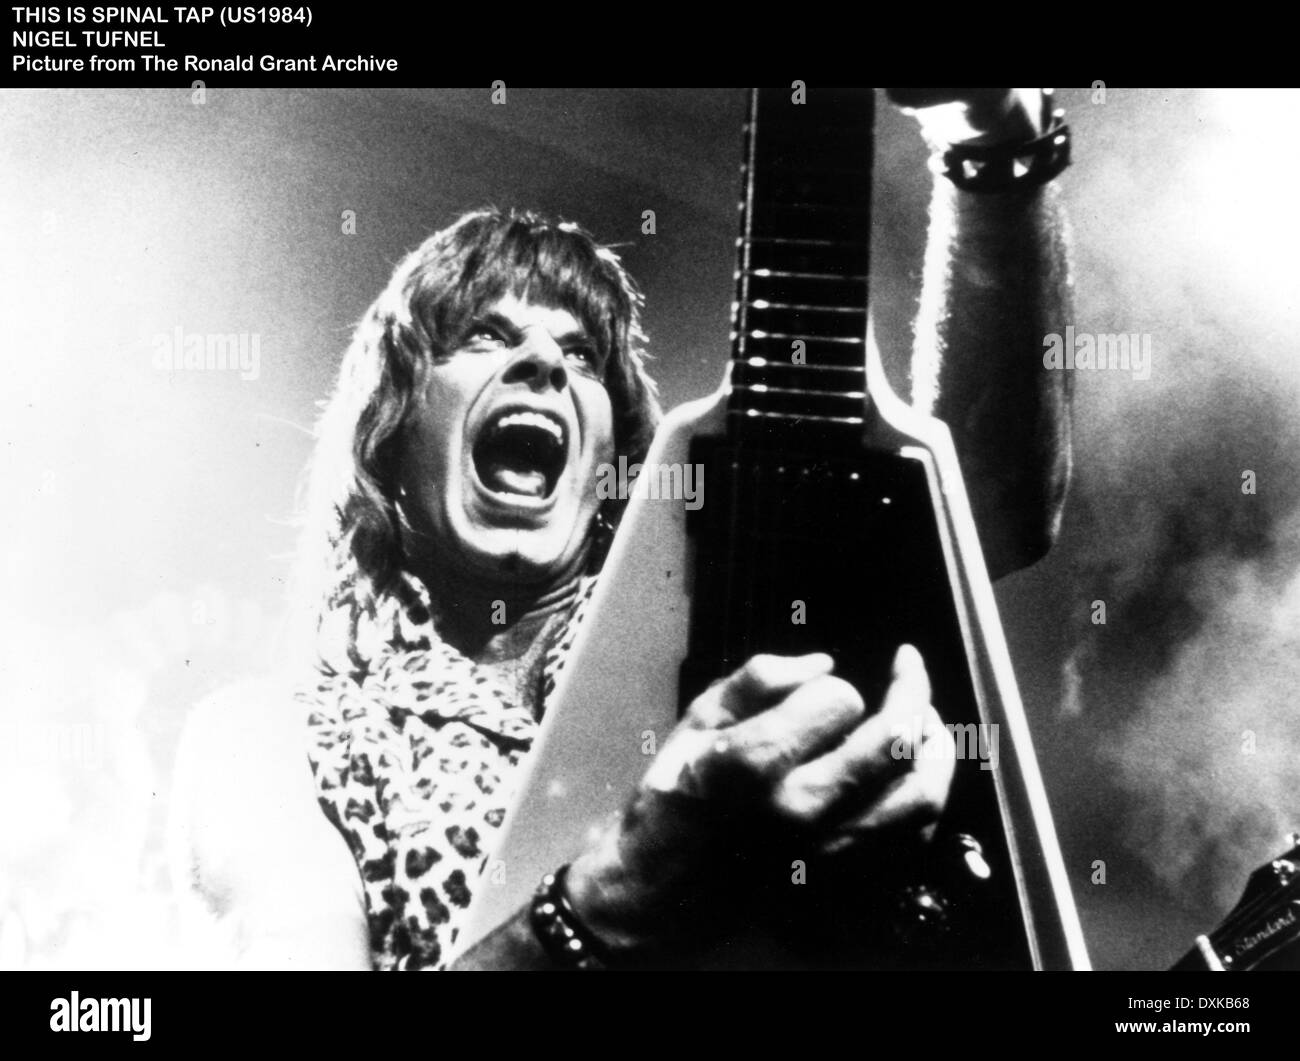 Nigel tufnel Black and White Stock Photos & Images - Alamy